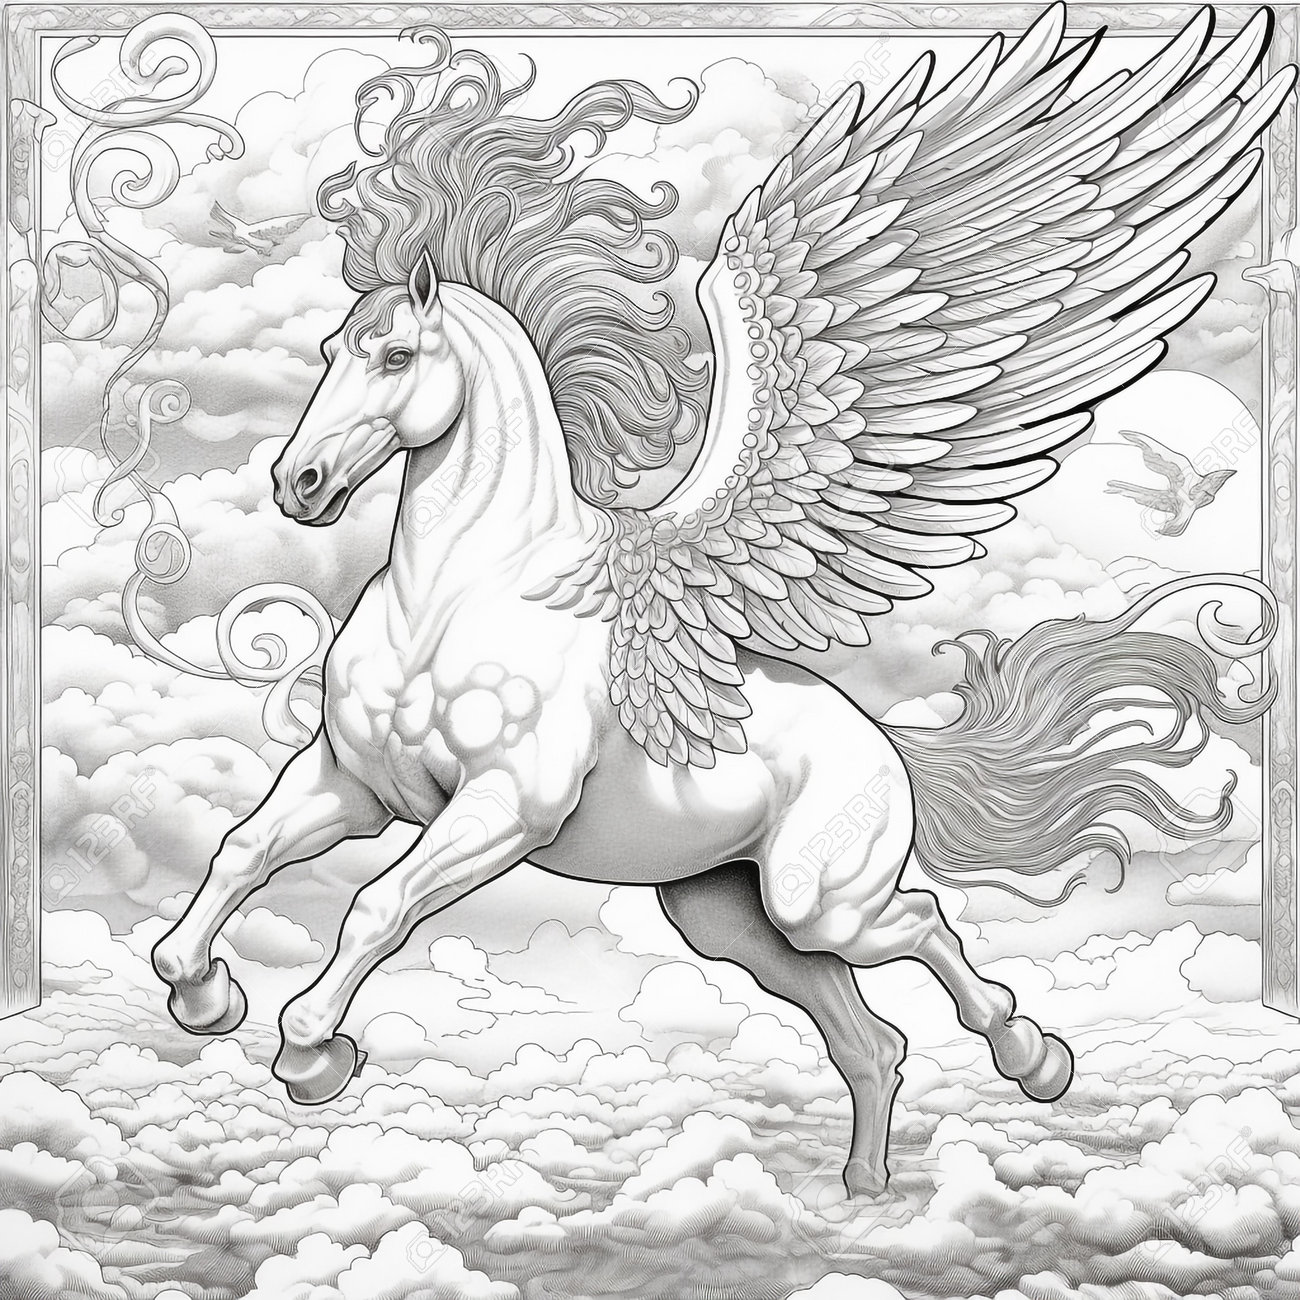 New art pegasus coloring pages stock photo picture and royalty free image image